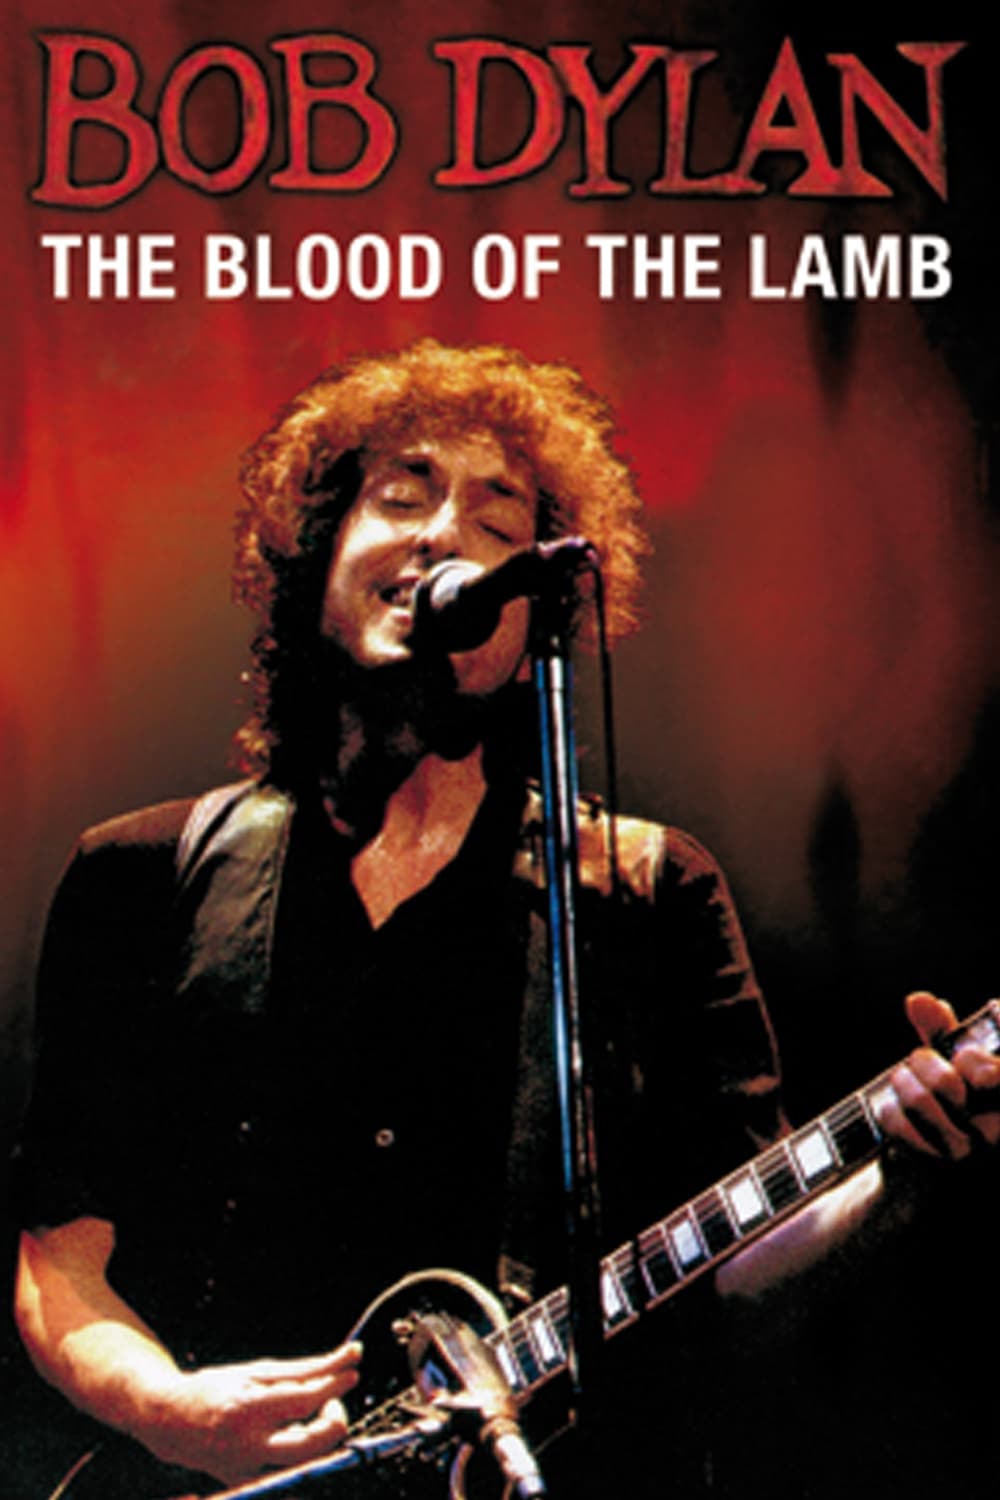 Bob Dylan: The Blood of the Lamb